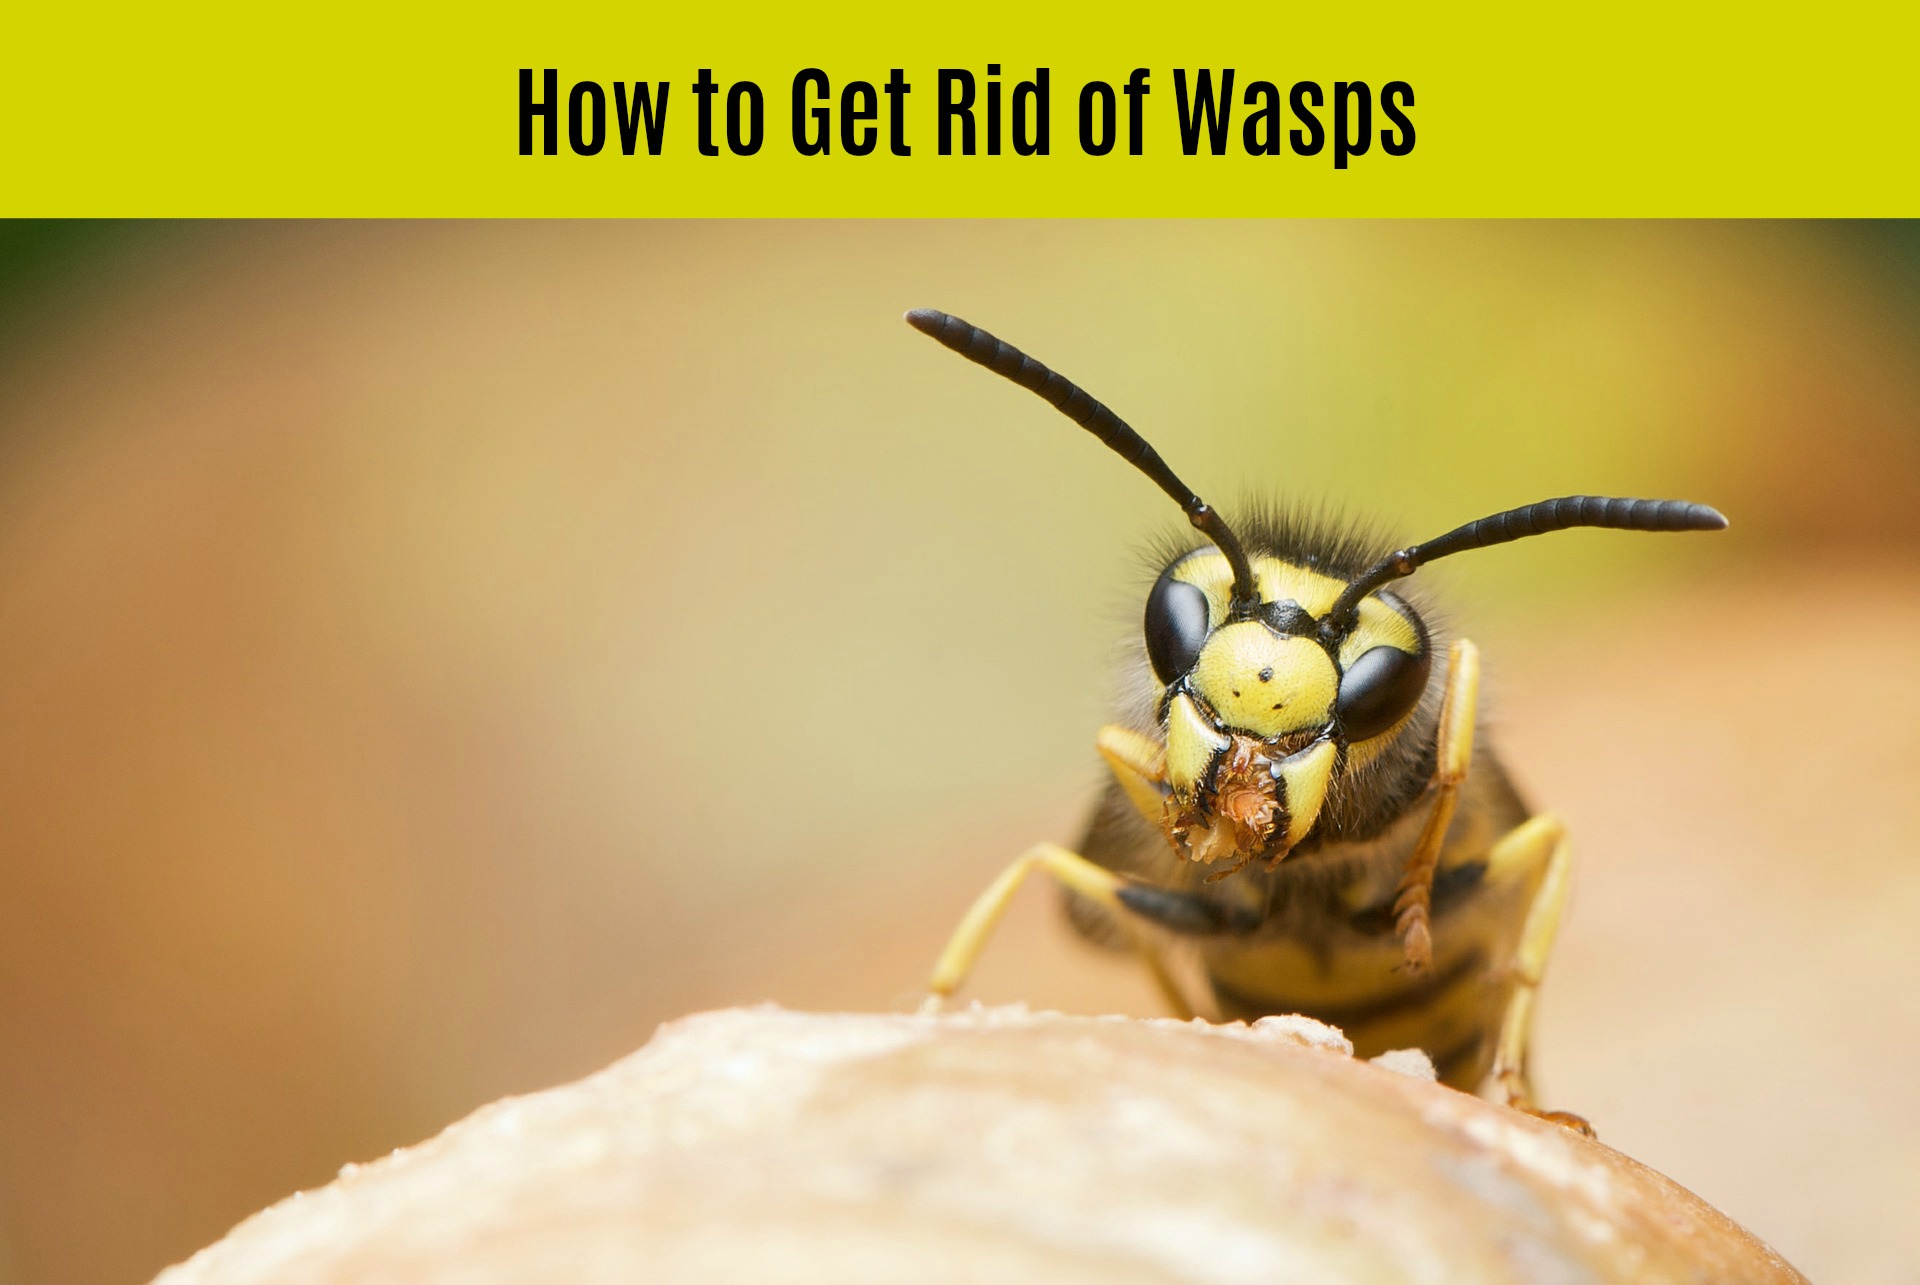 Getting rid of Wasps title photo